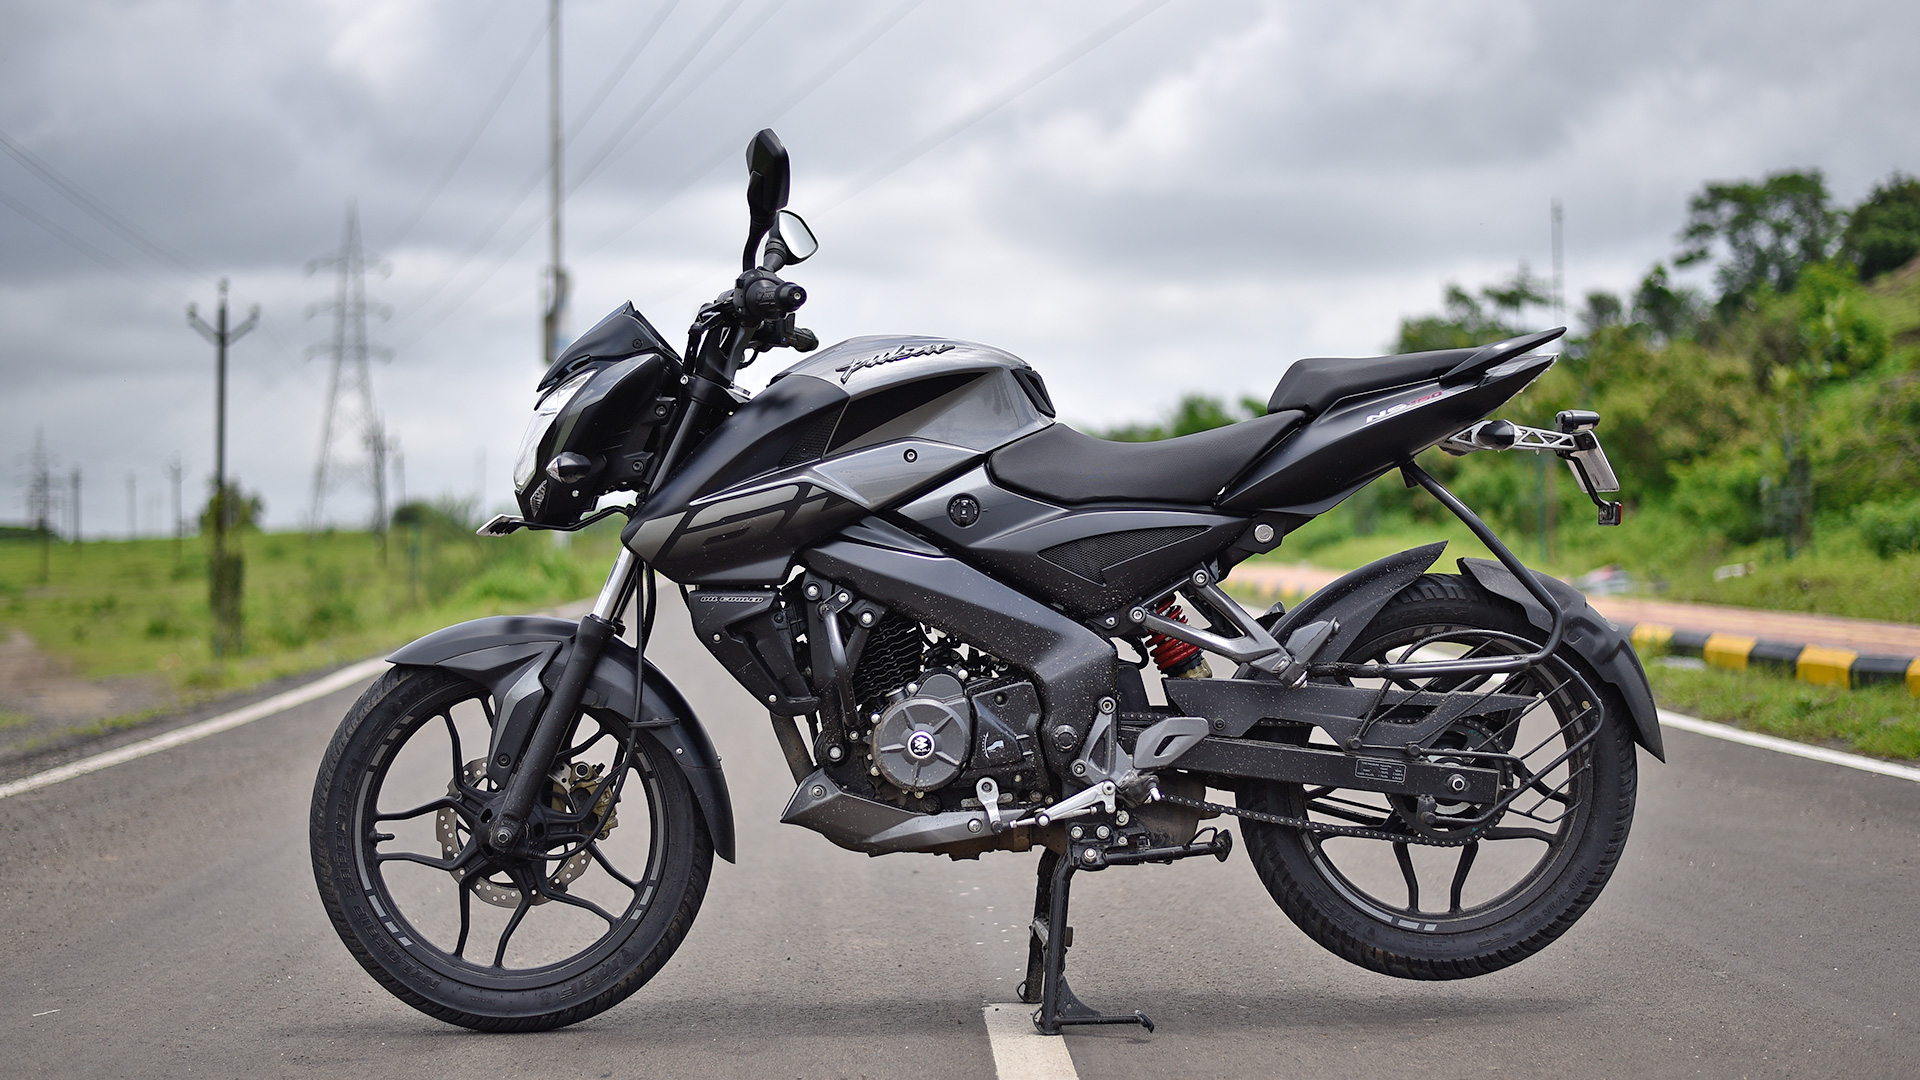 Bajaj Pulsar NS160 (NS 160) Launched in India - Price 